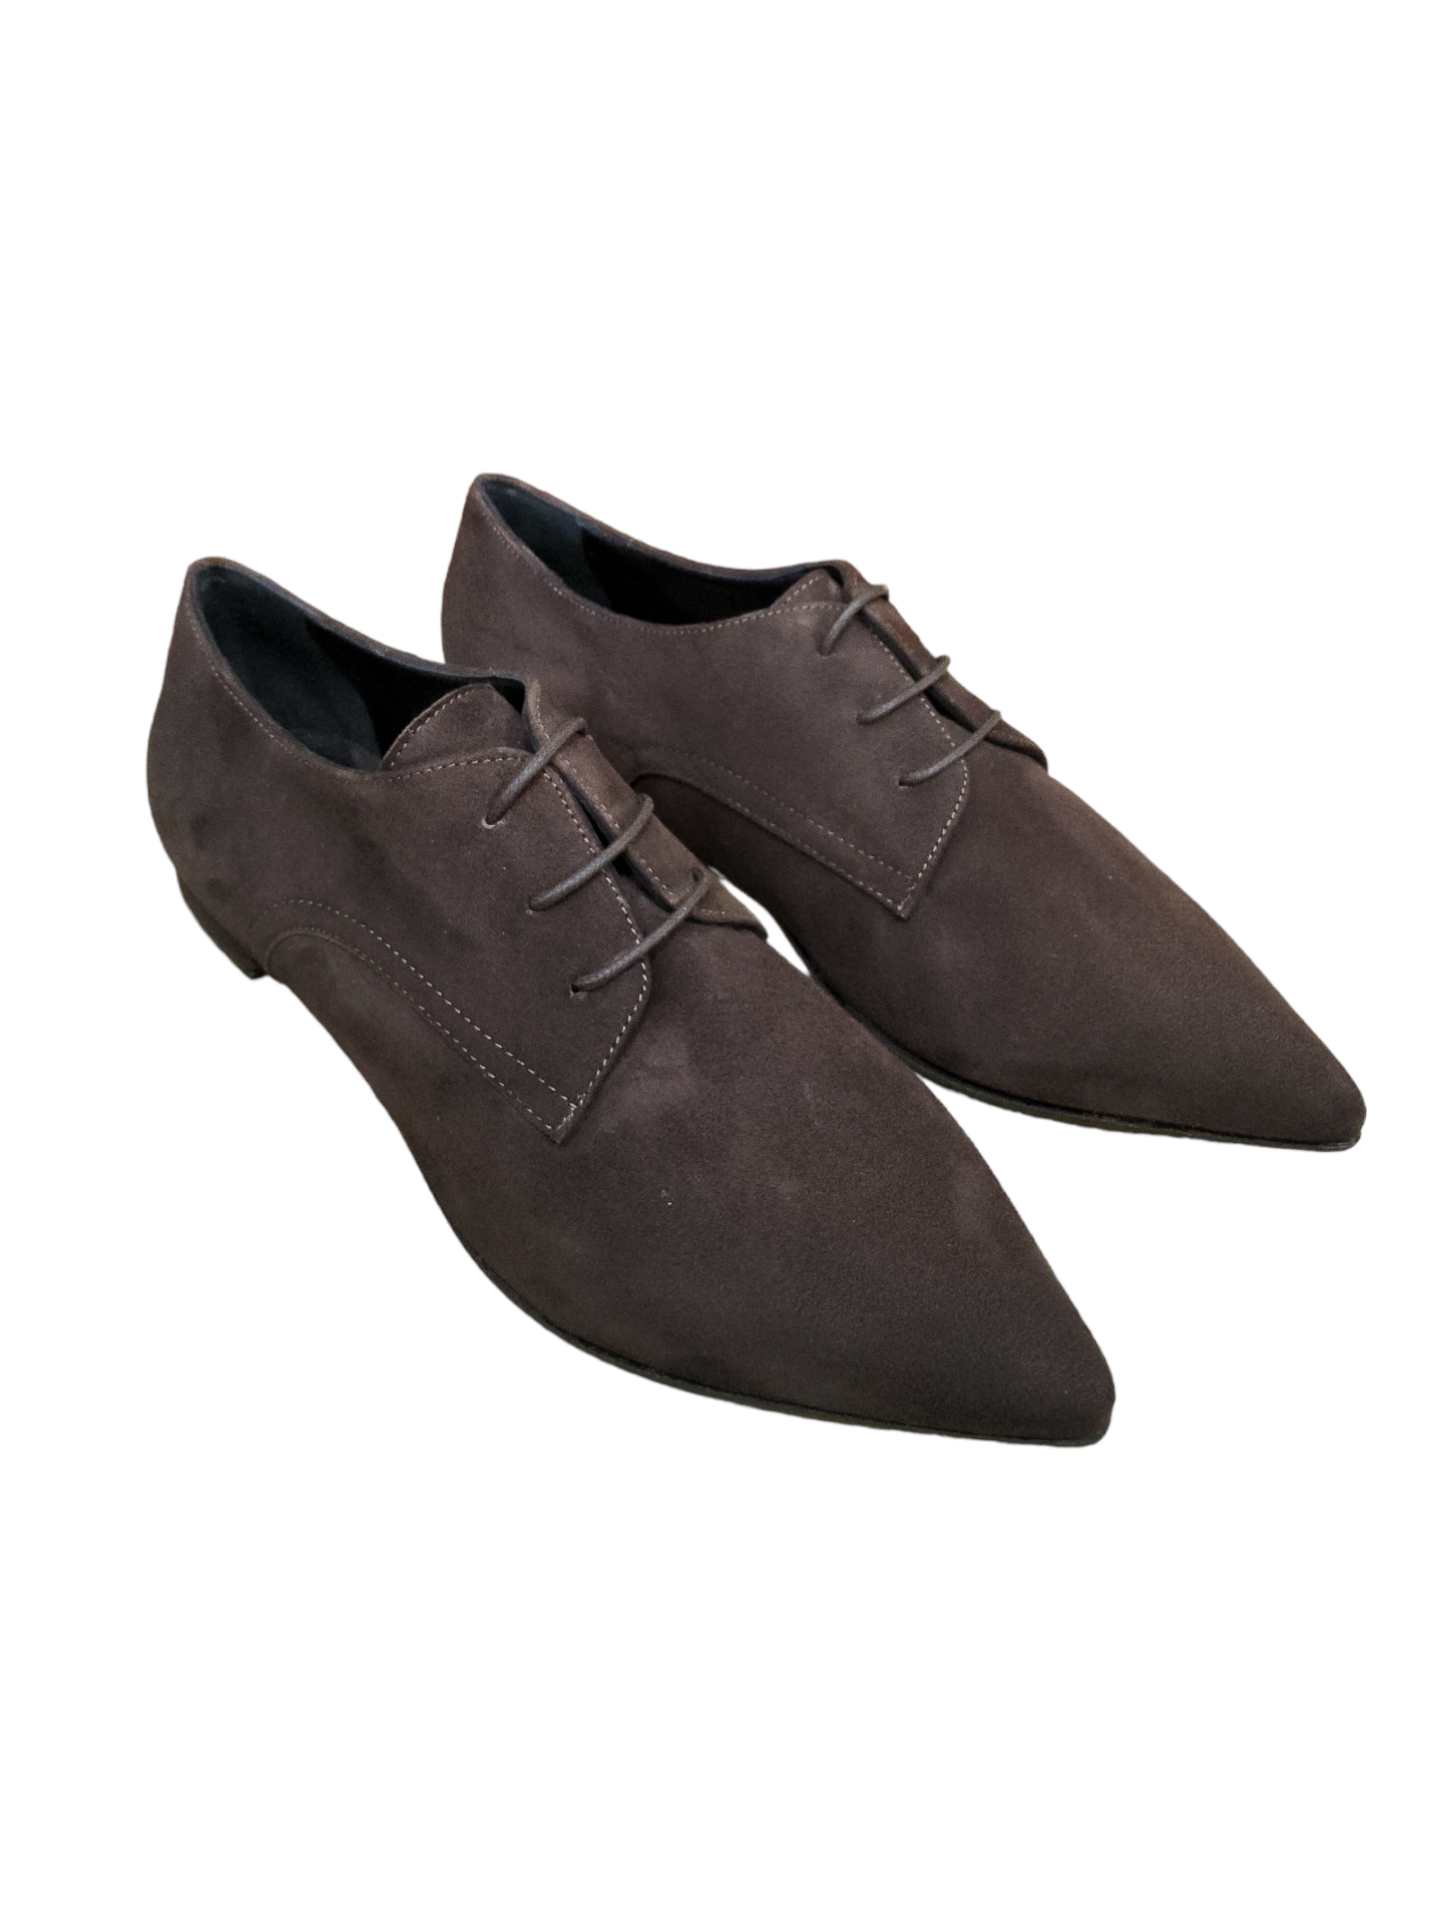 Brown suede leather brogues